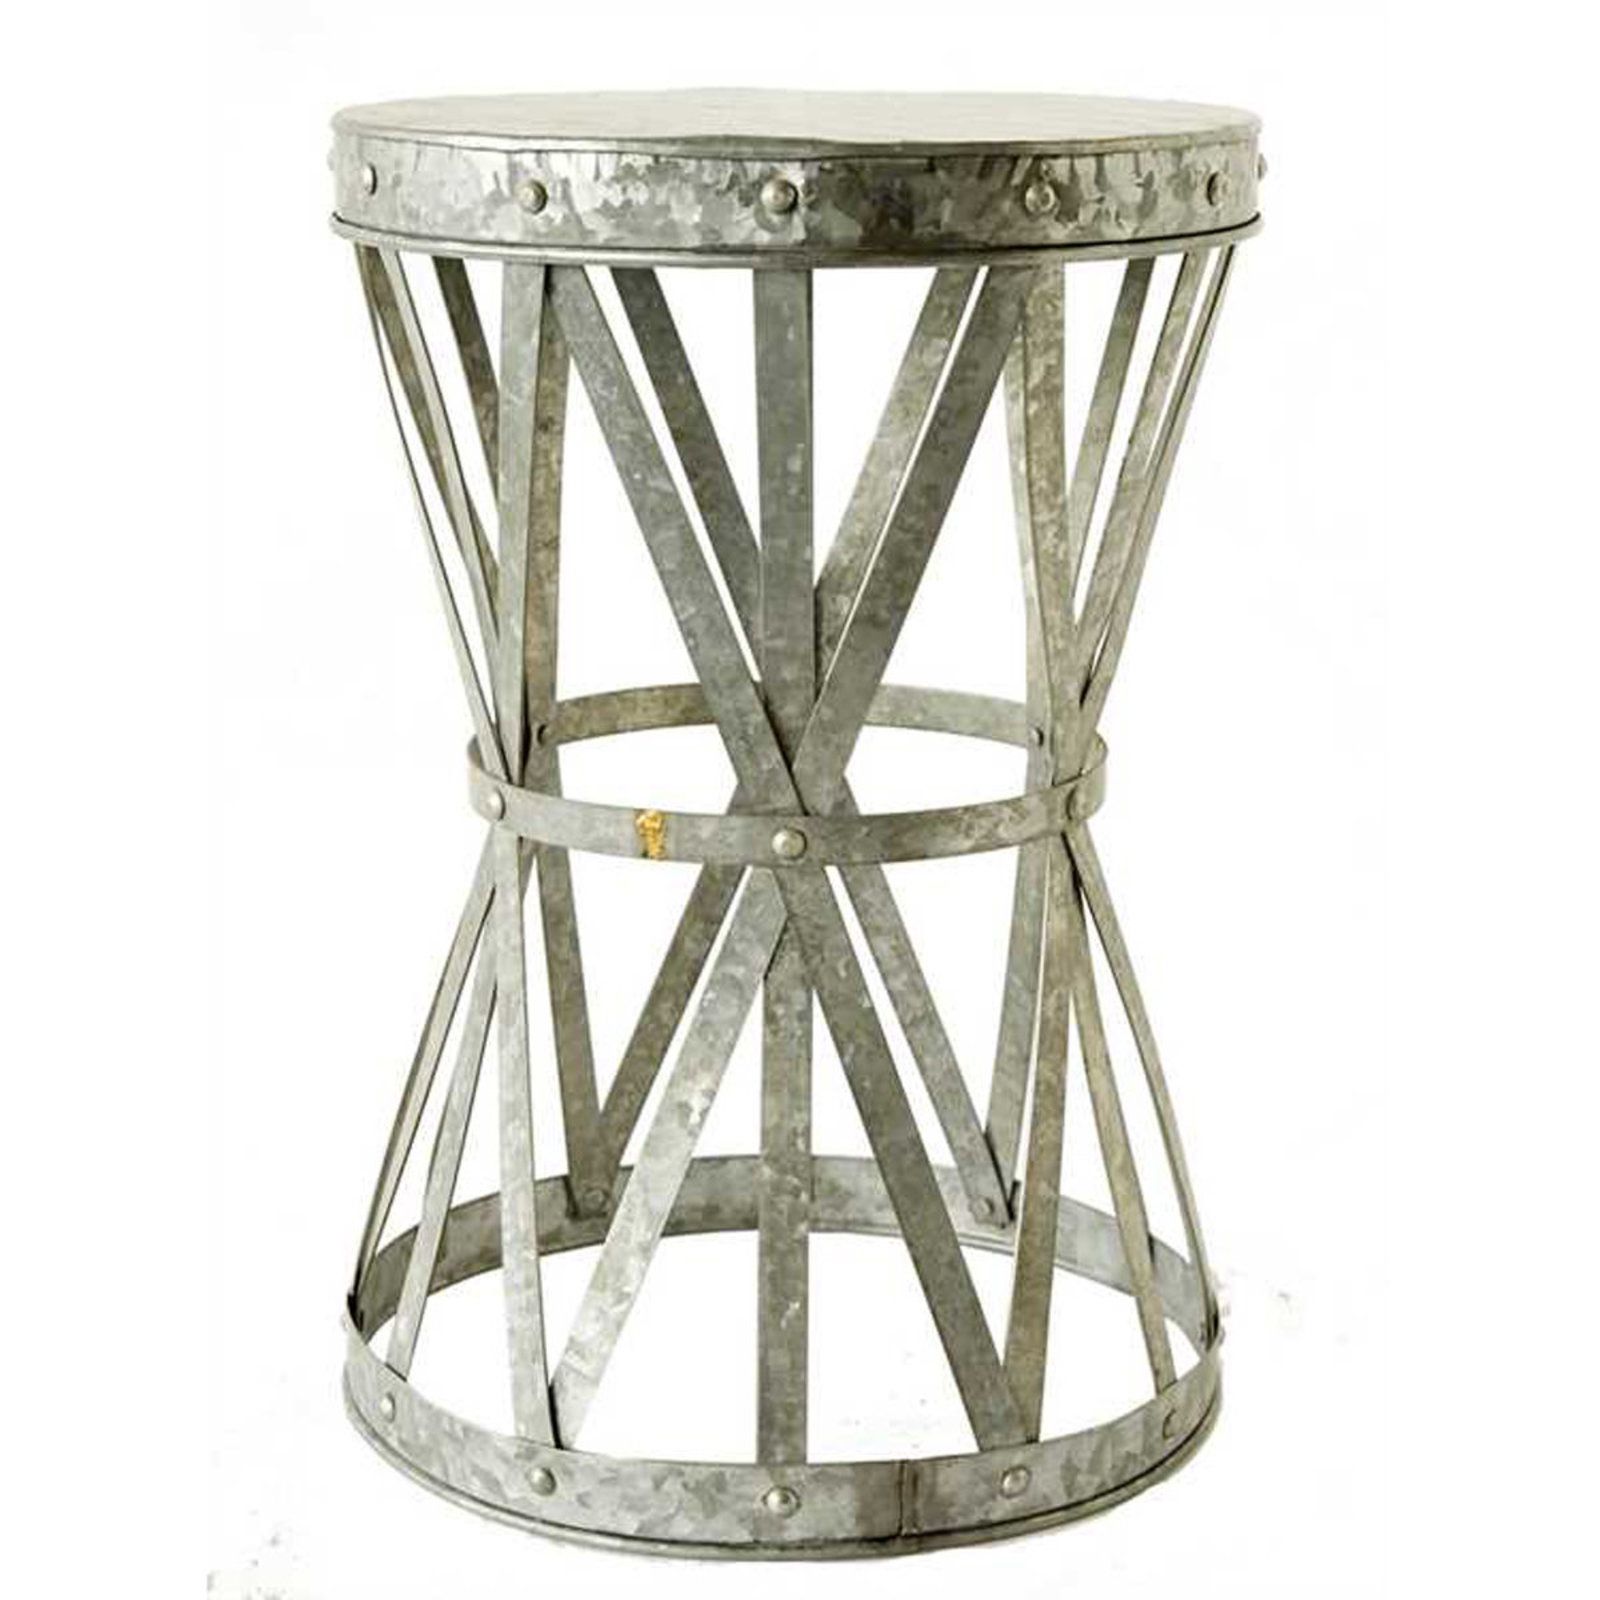 galvanized metal side table stool catalog crush accent decor rustic antique hutch modern legs full futon cover concrete look outdoor furniture laura ashley dining chairs wicker